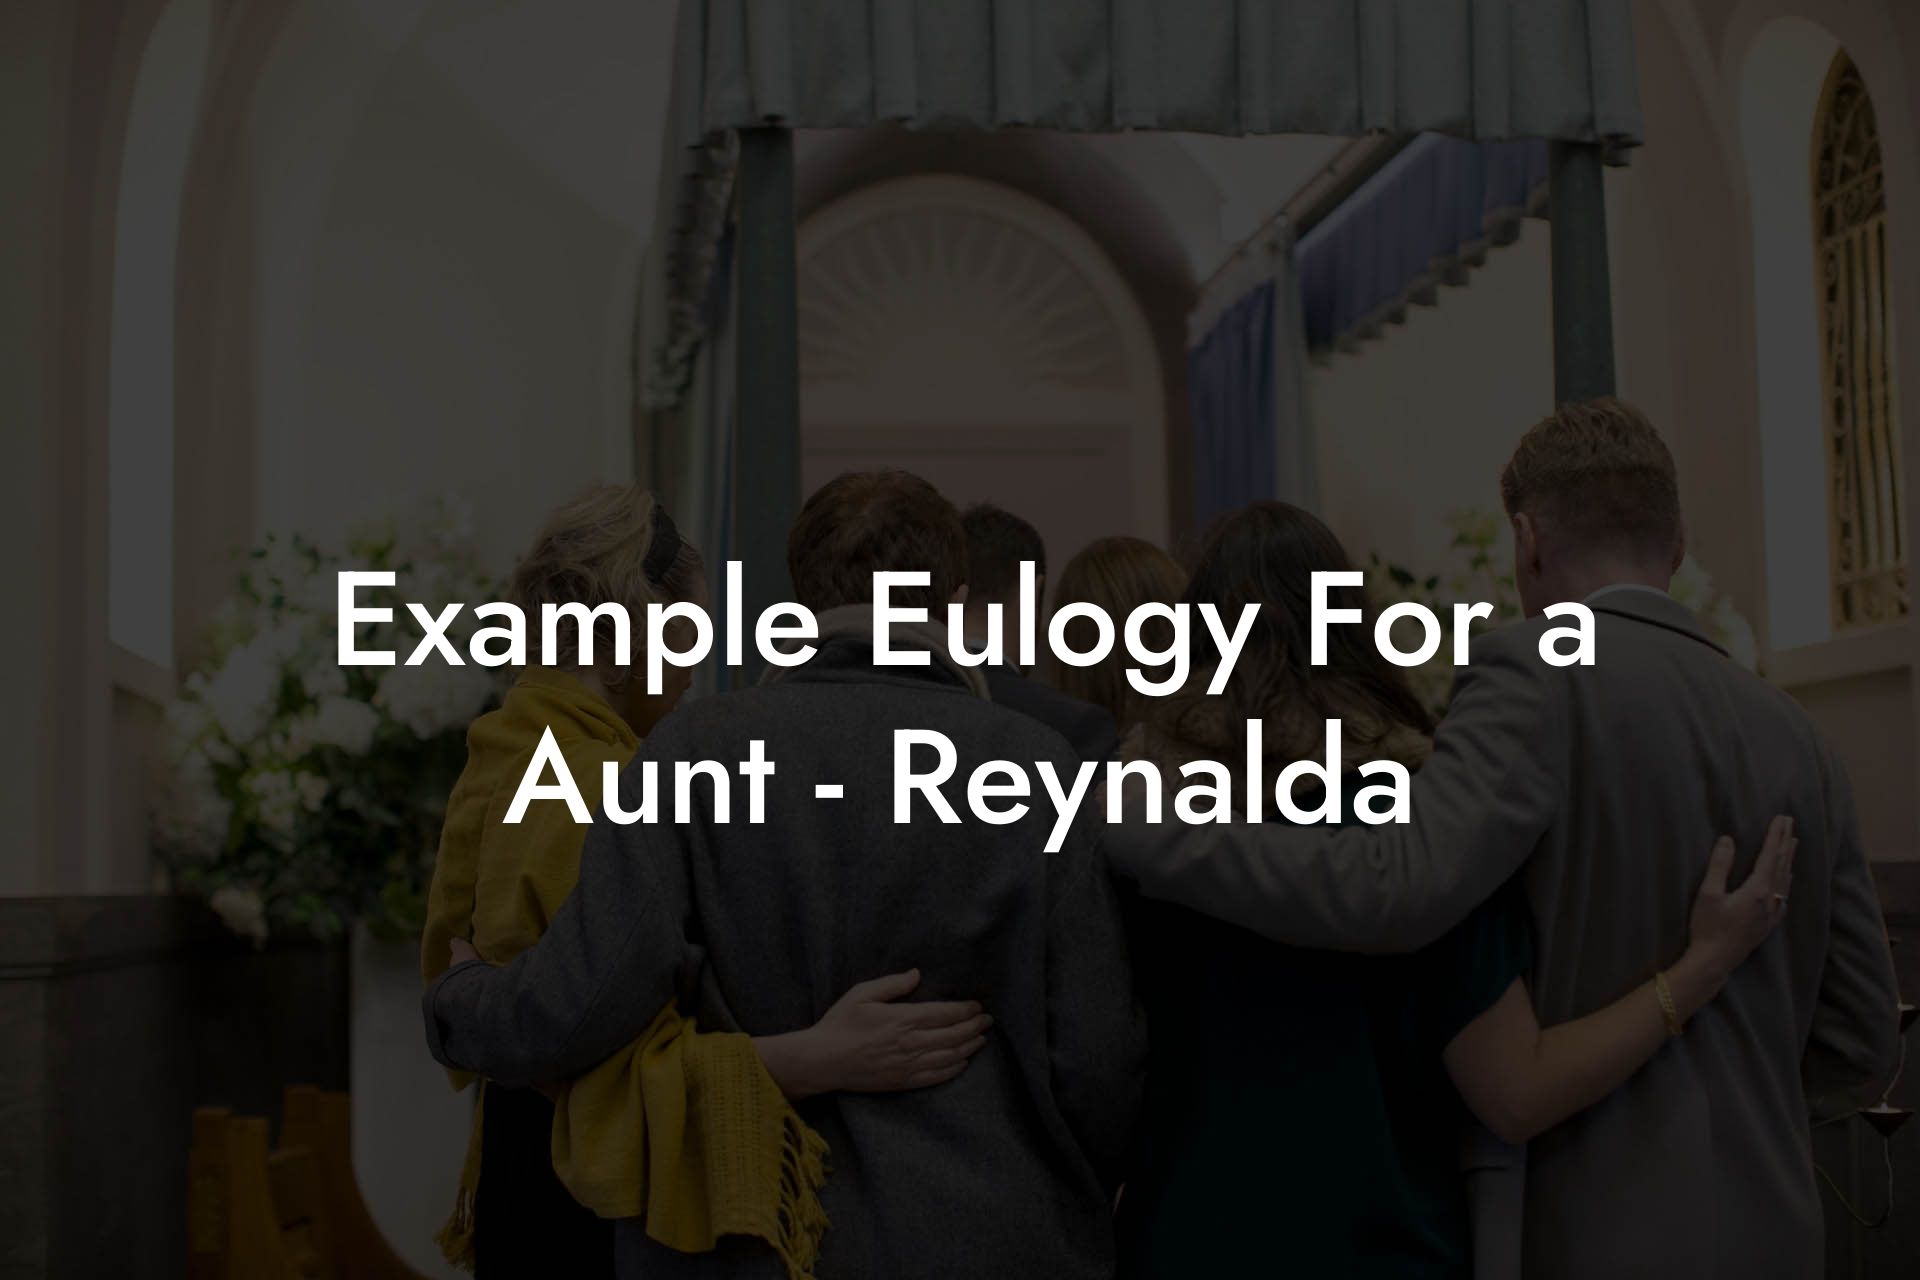 Example Eulogy For a Aunt - Reynalda